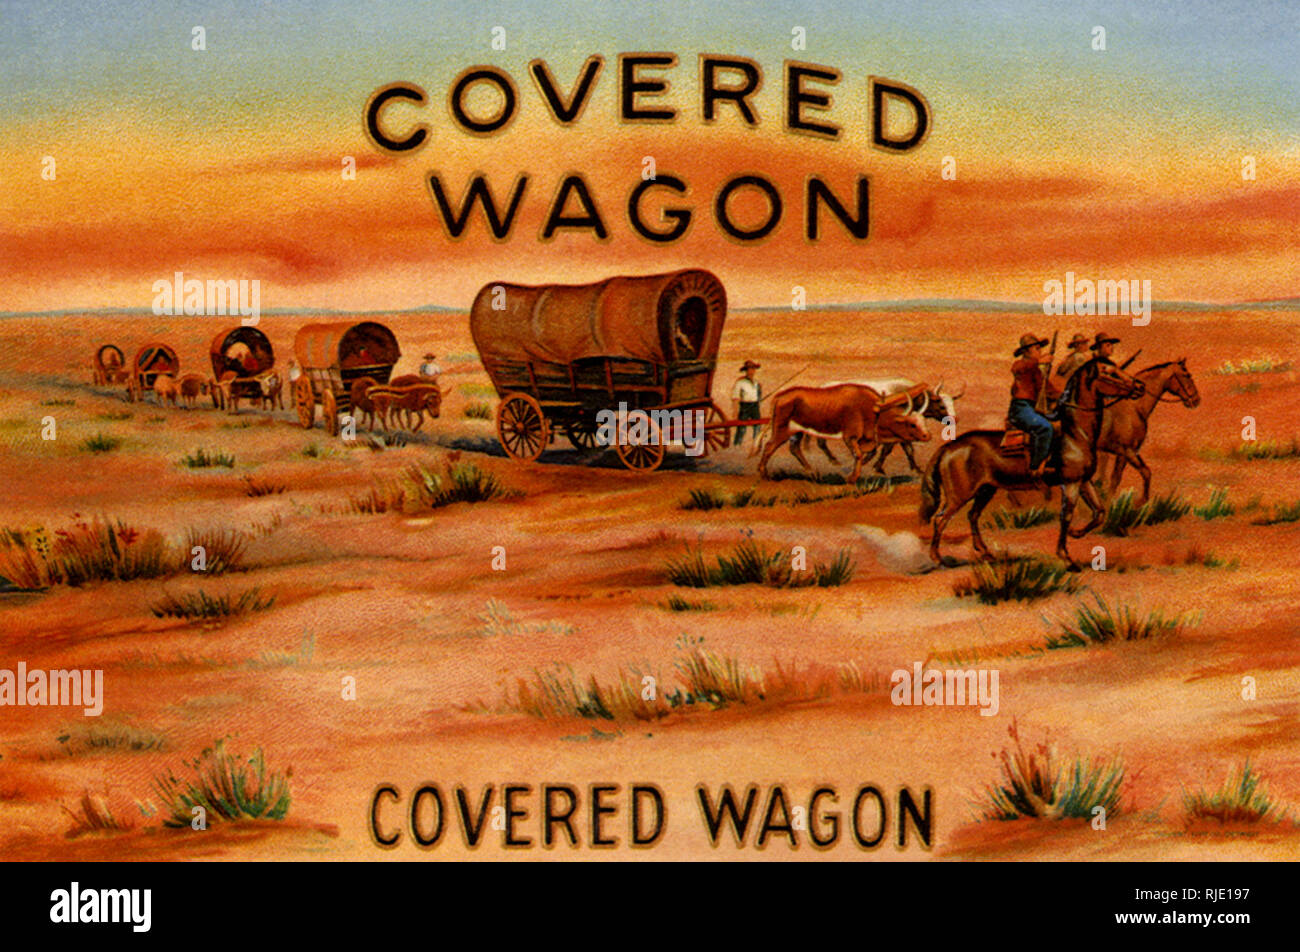 Covered Wagon. Stock Photo